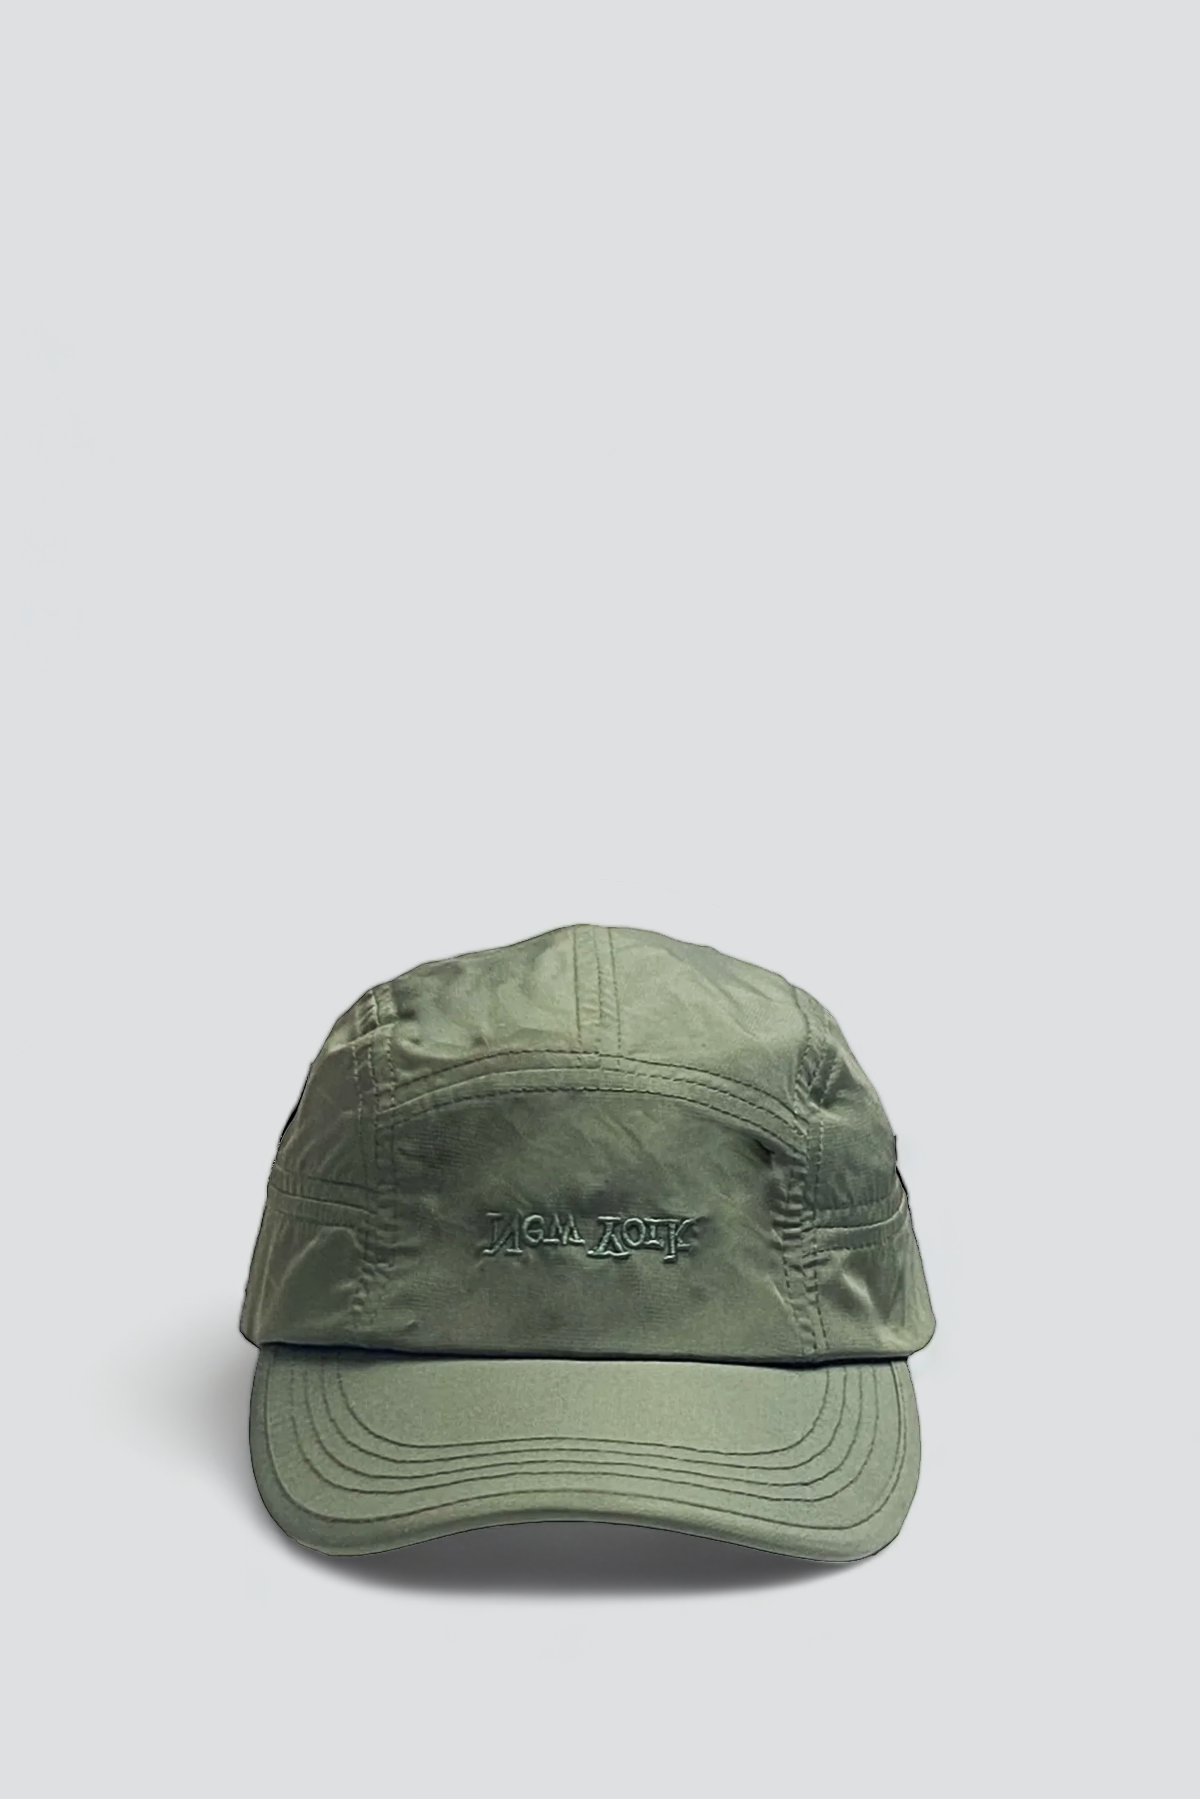 Nylon New York Embroidered Dry Hat - Green